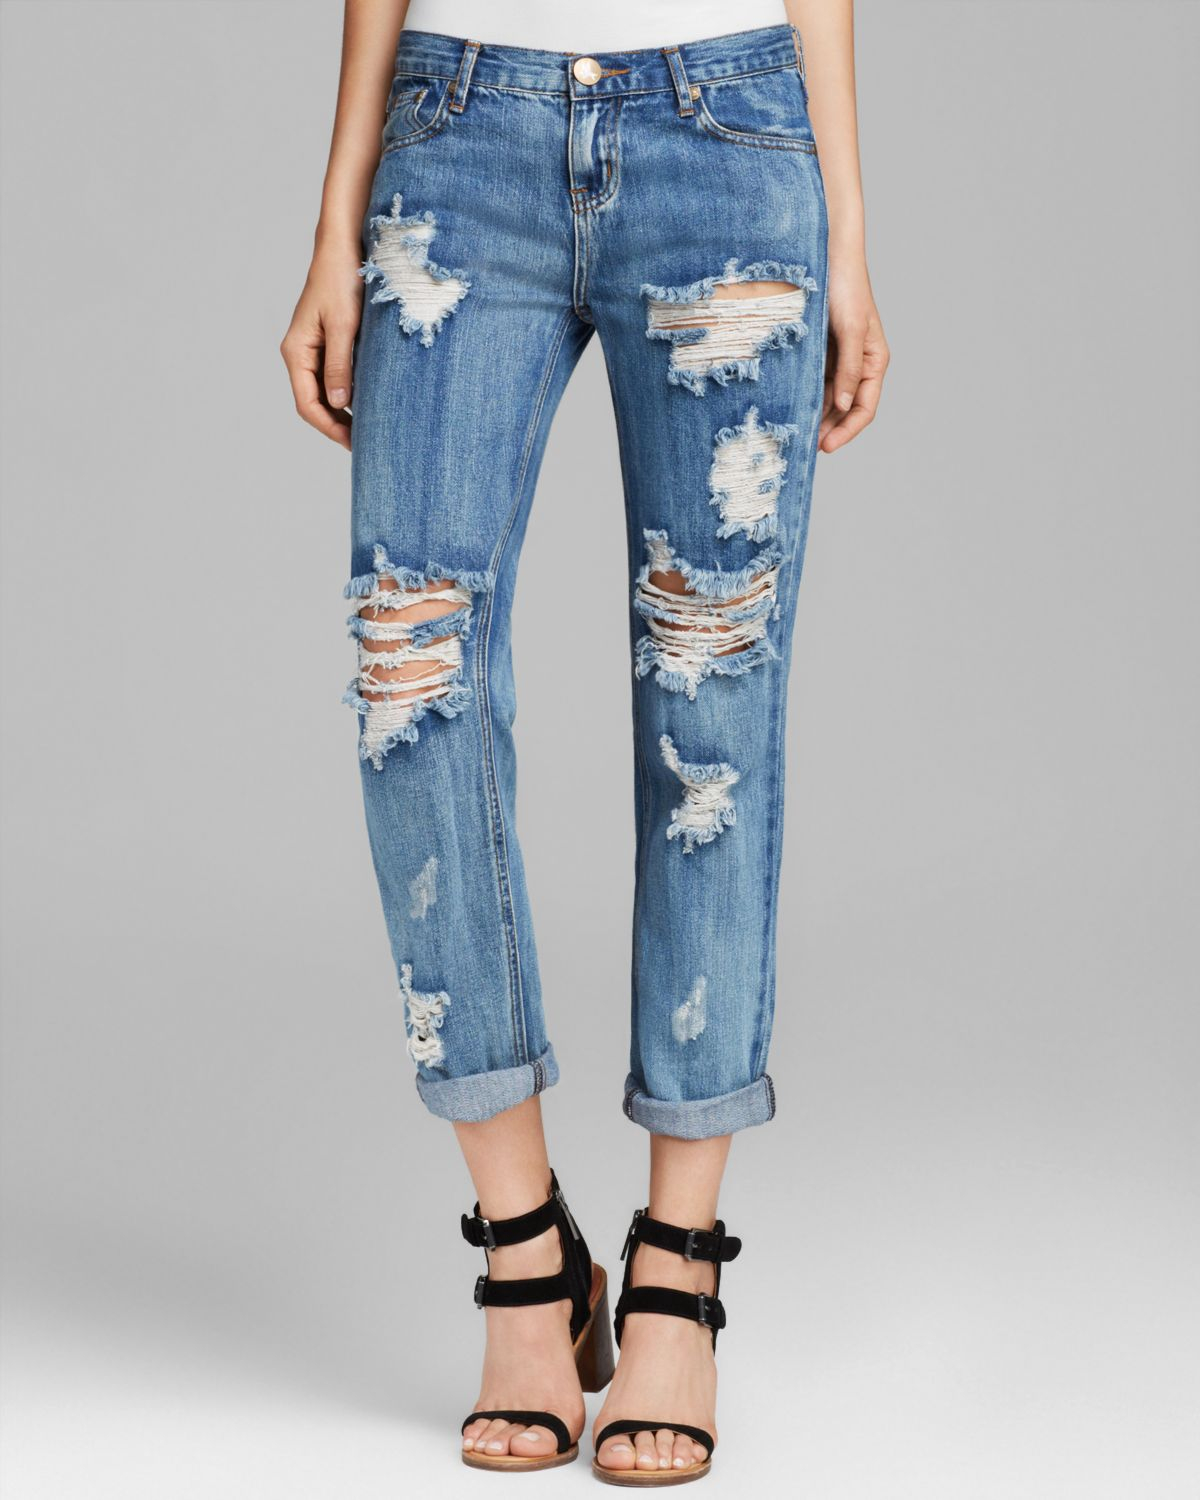 Lyst - One Teaspoon Awesome Baggies Jeans In Cobain in Blue